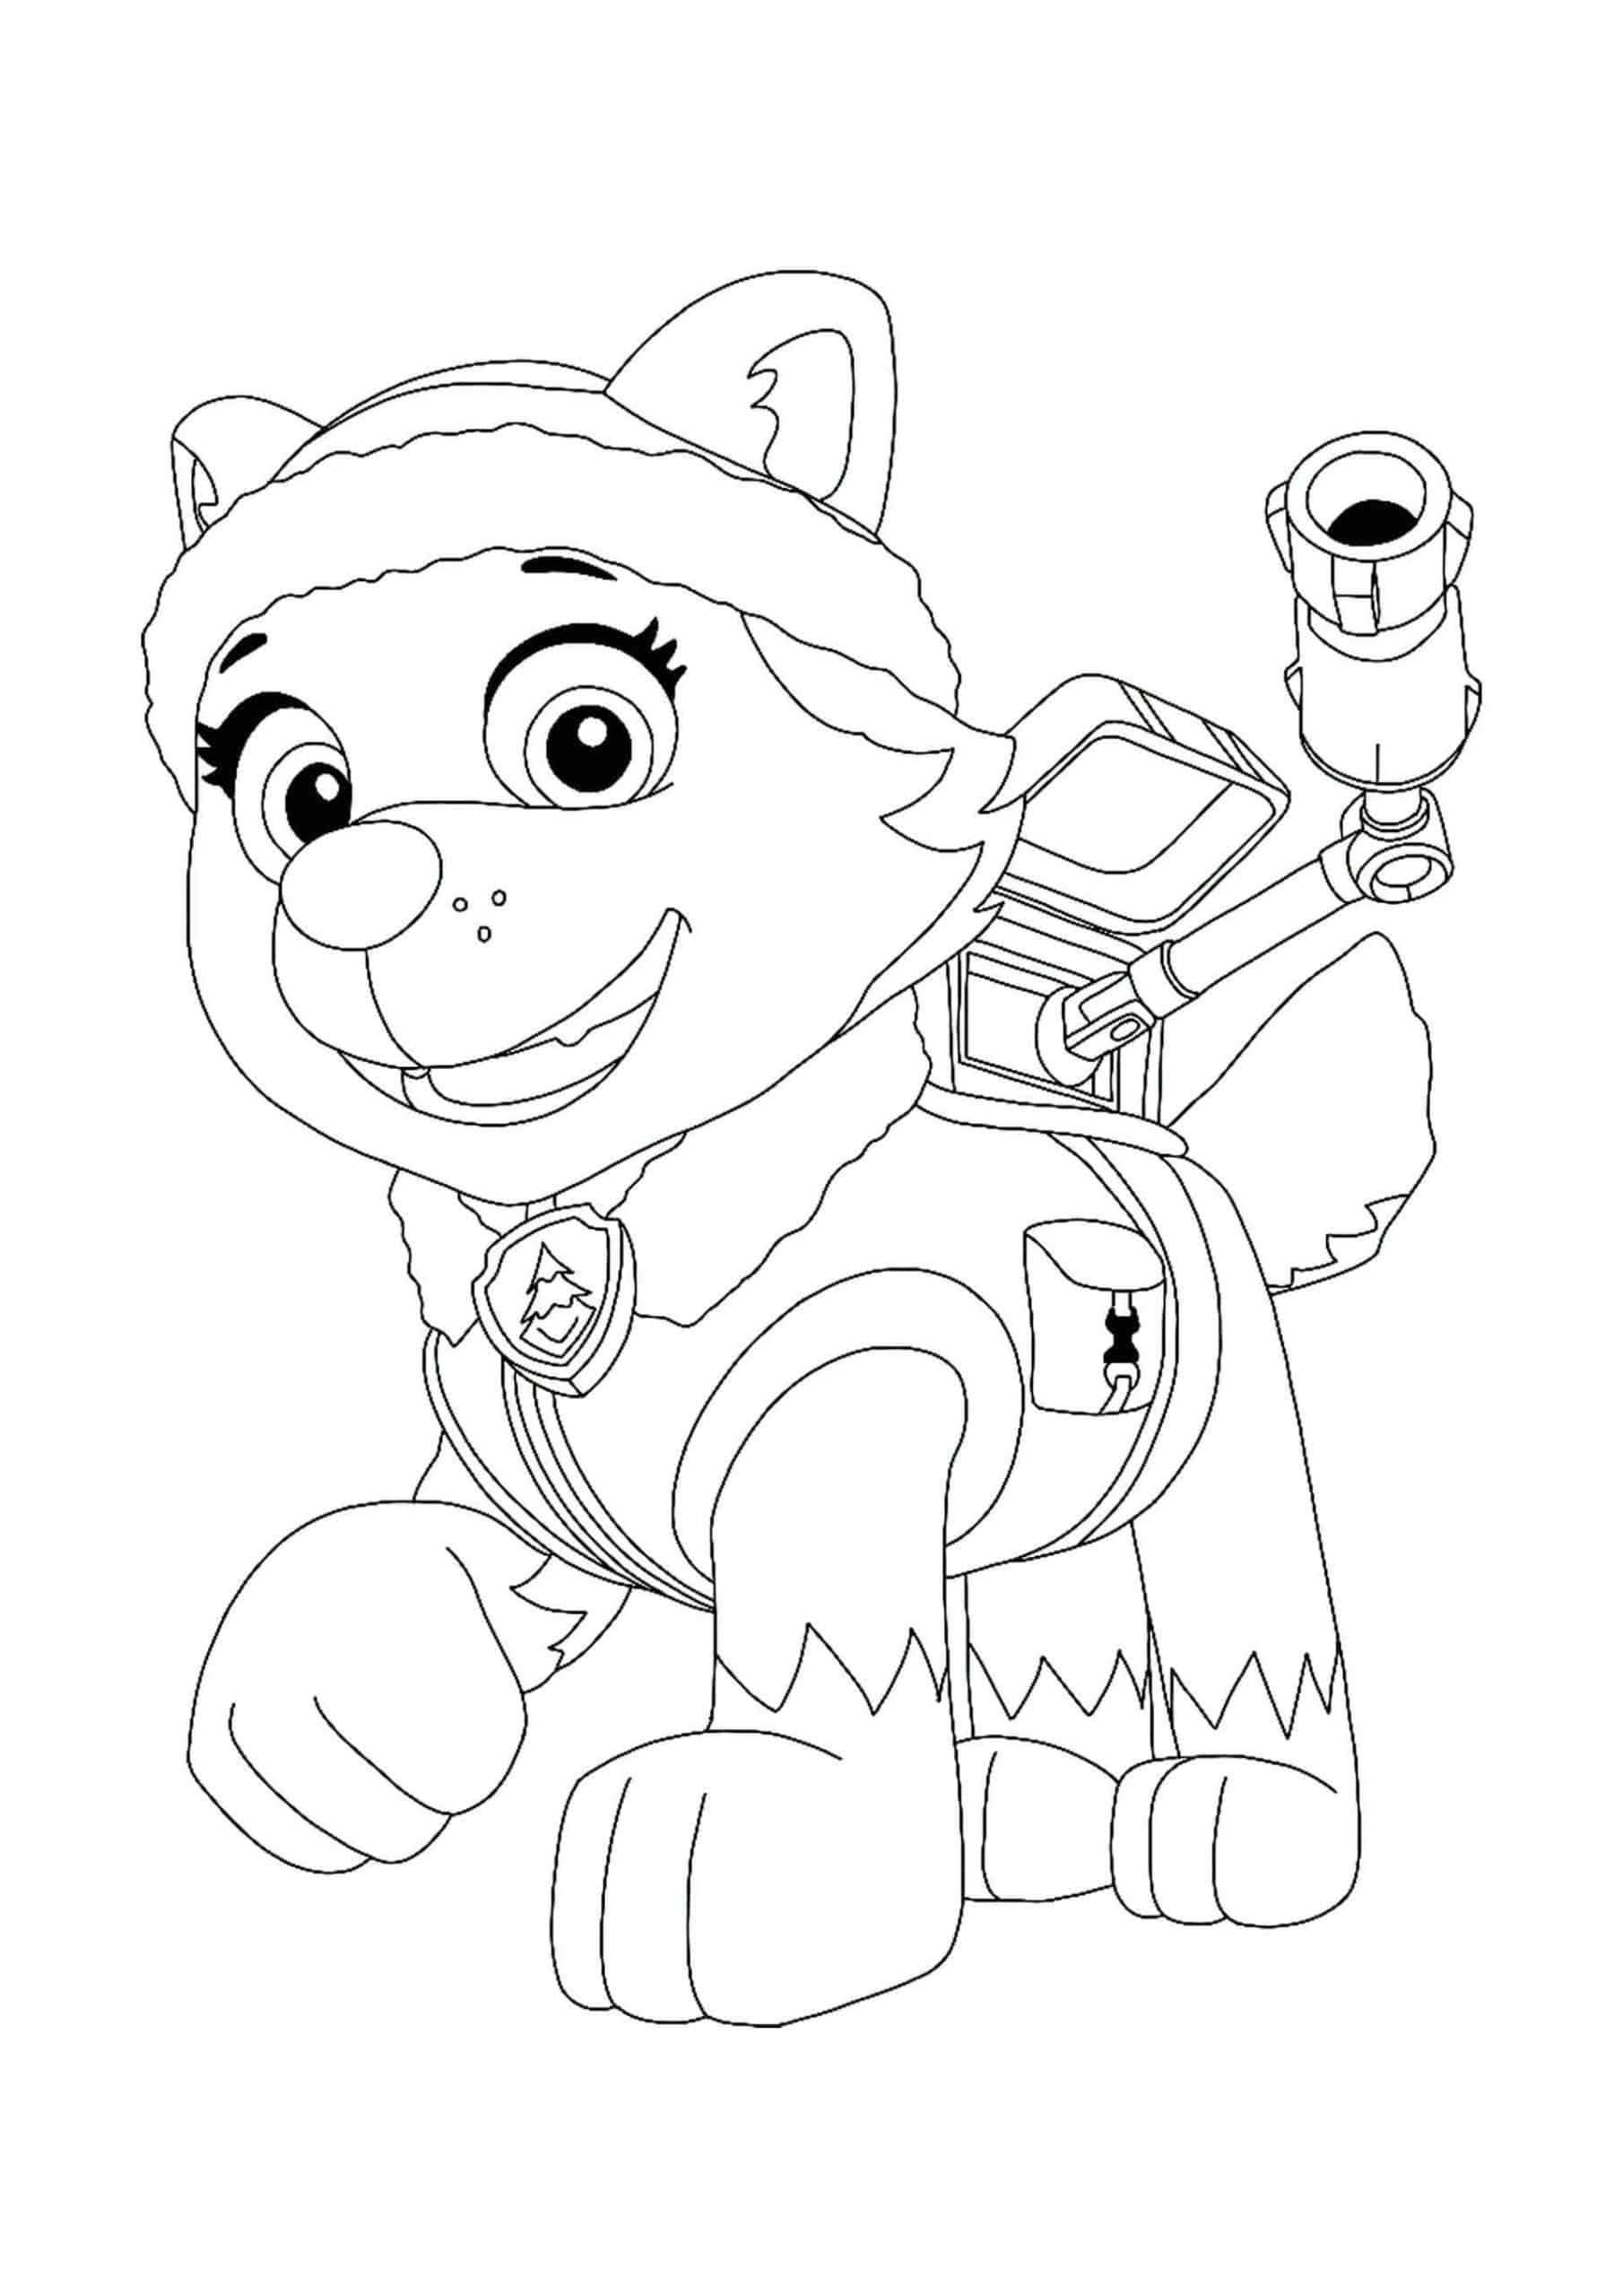 Paw Patrol Everest Coloring Pages - Coloring Home